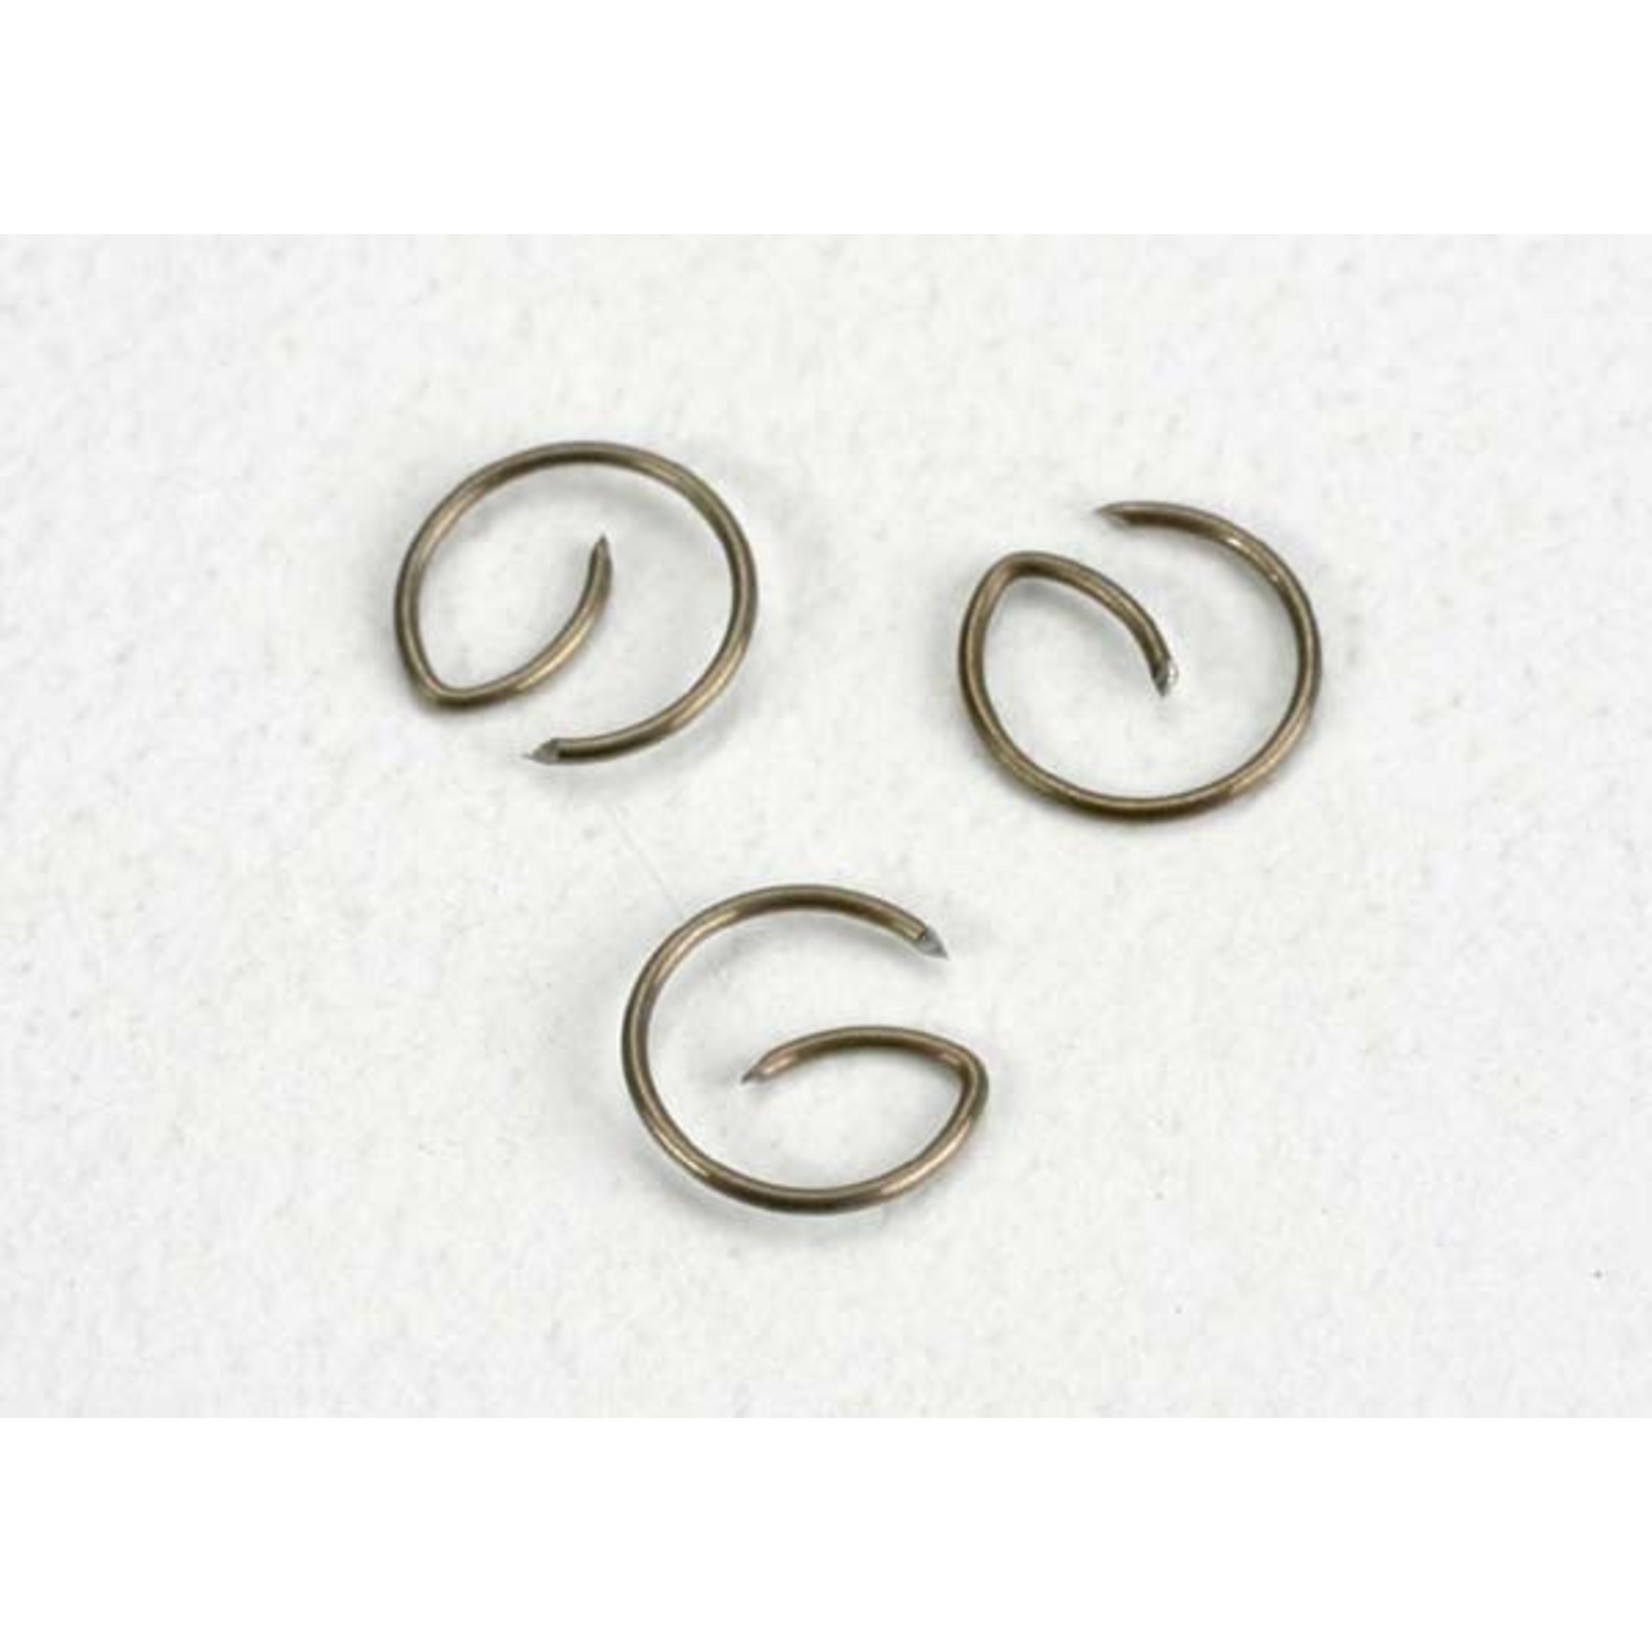 Traxxas 3235 - G-spring retainers (wrist pin keepers) (3)